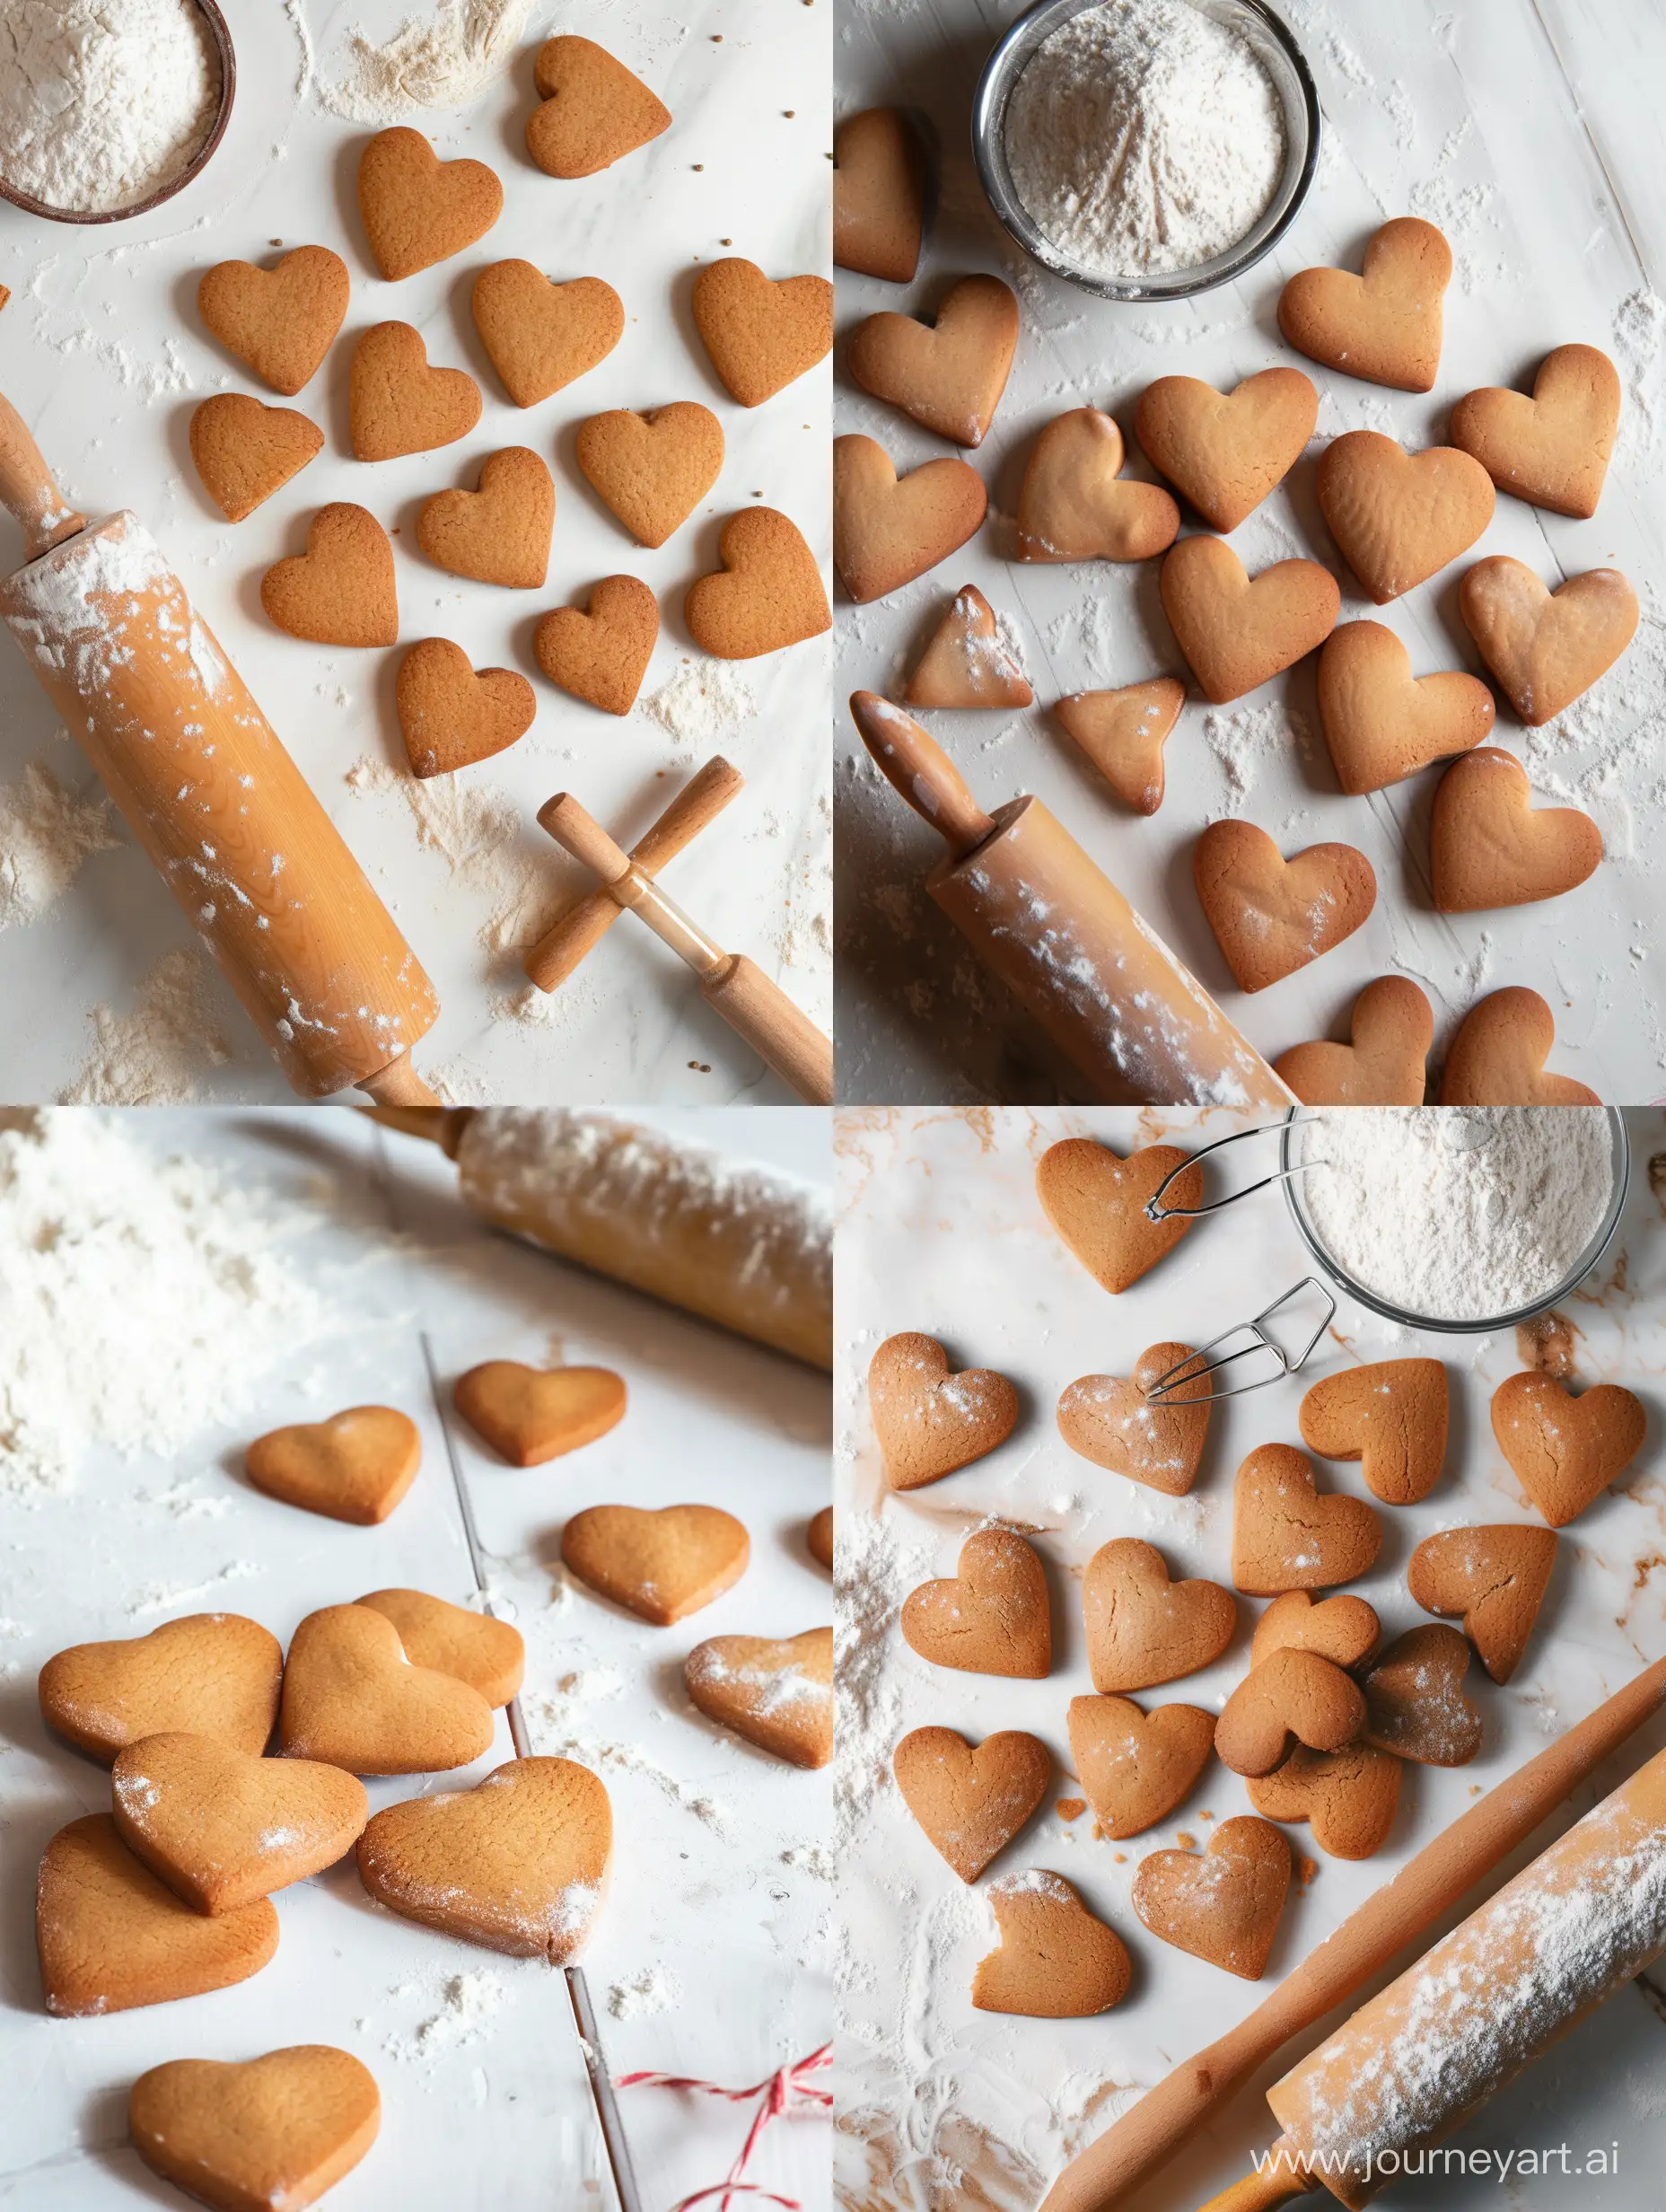 HeartShaped-Cookie-Baking-with-Flour-and-Rolling-Pin-on-Light-Background